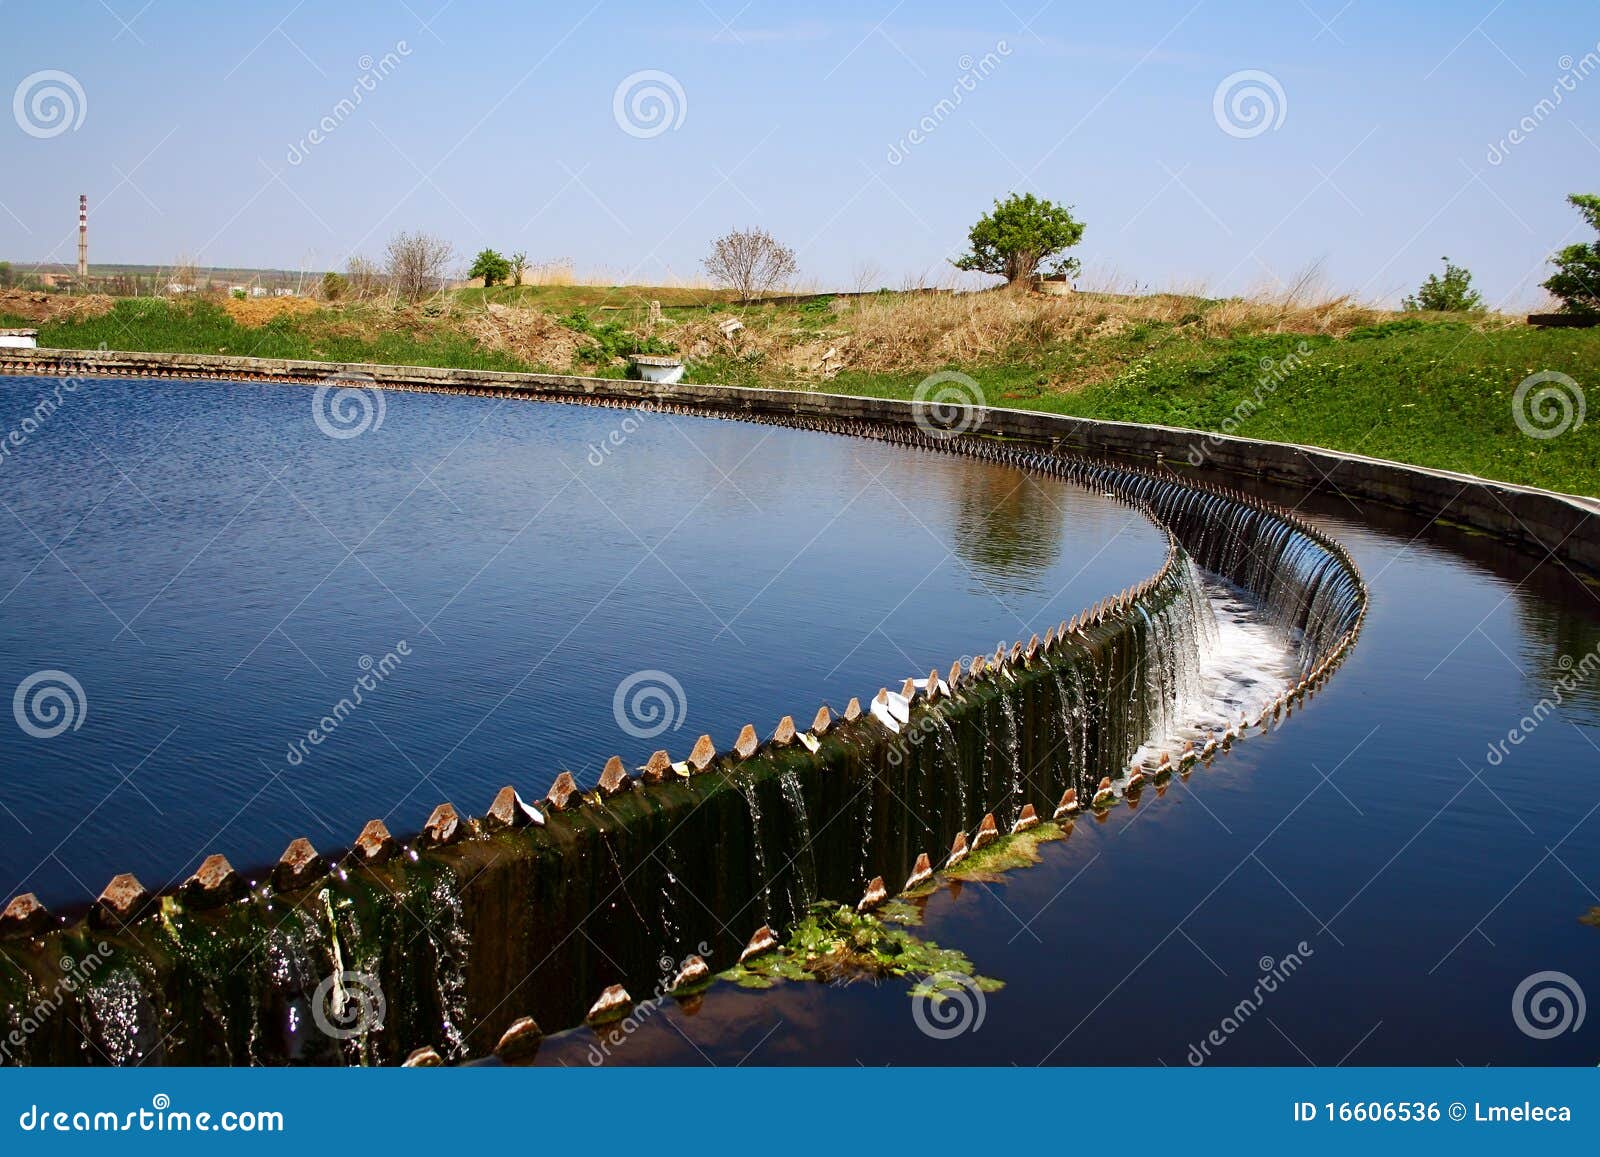 settler at wastewater treatment plant